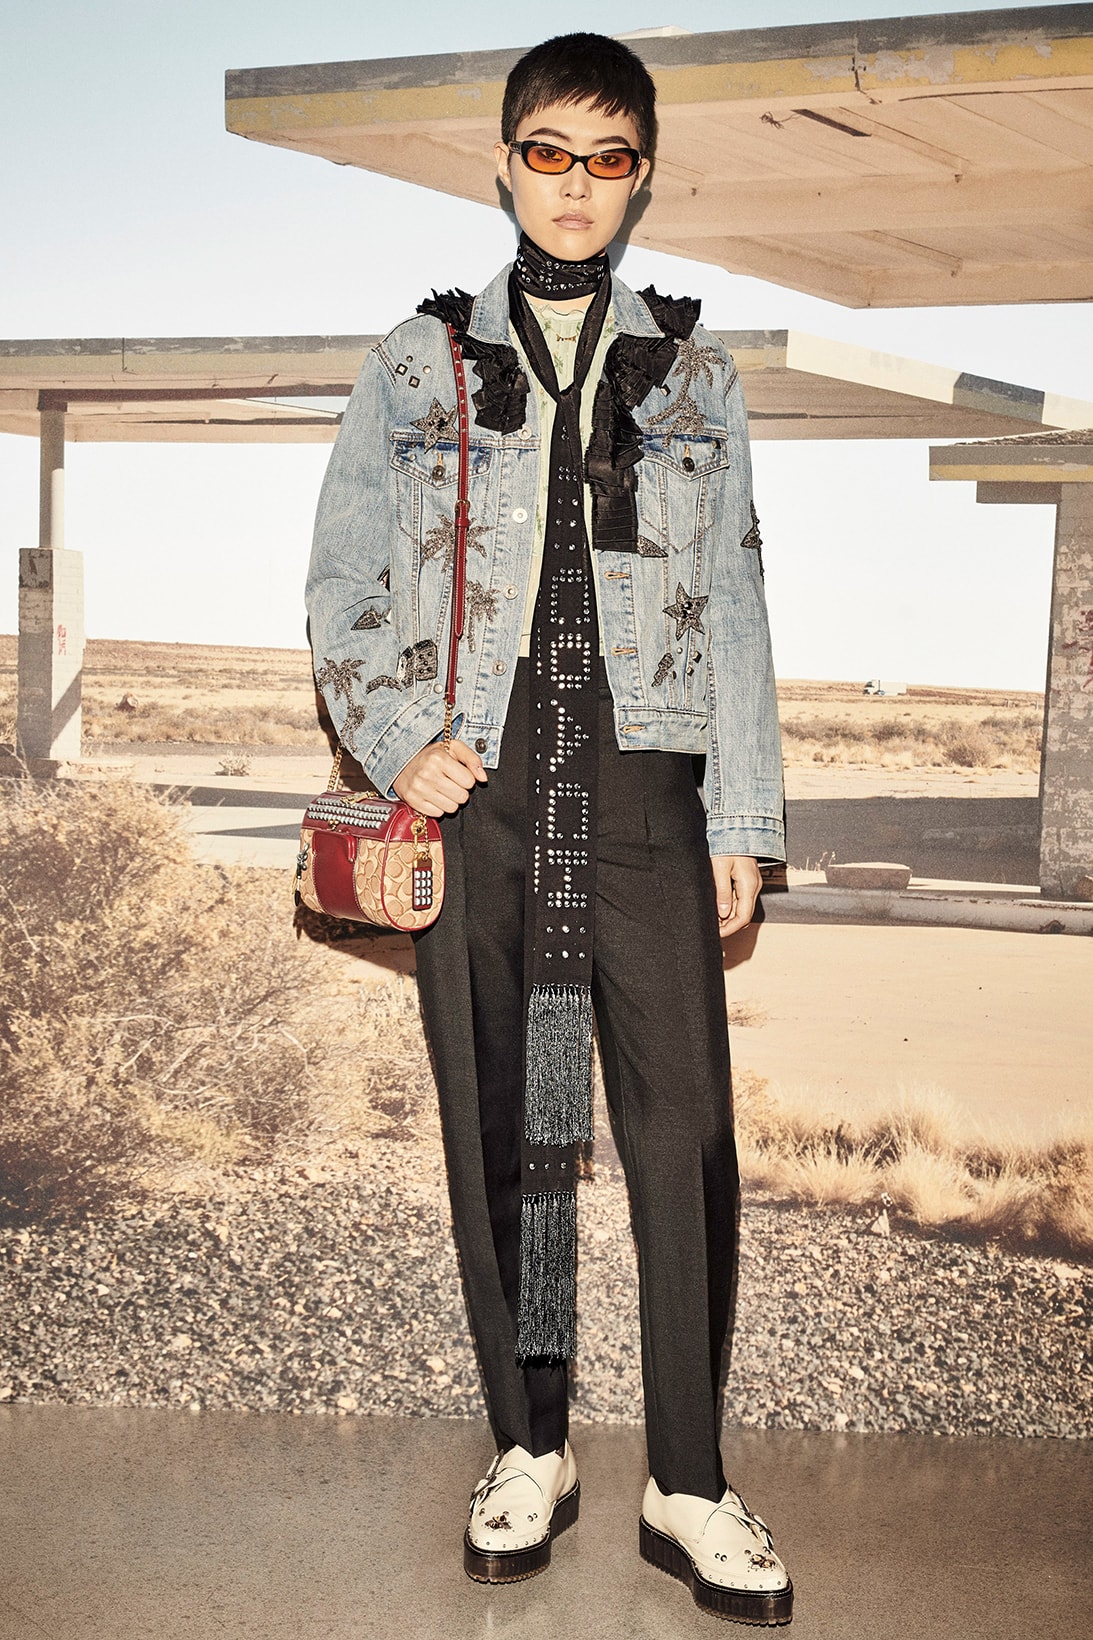 Coach 1941 Resort 2019 Lookbook collection release date info drop viper lounge stuart vevers hollywood california